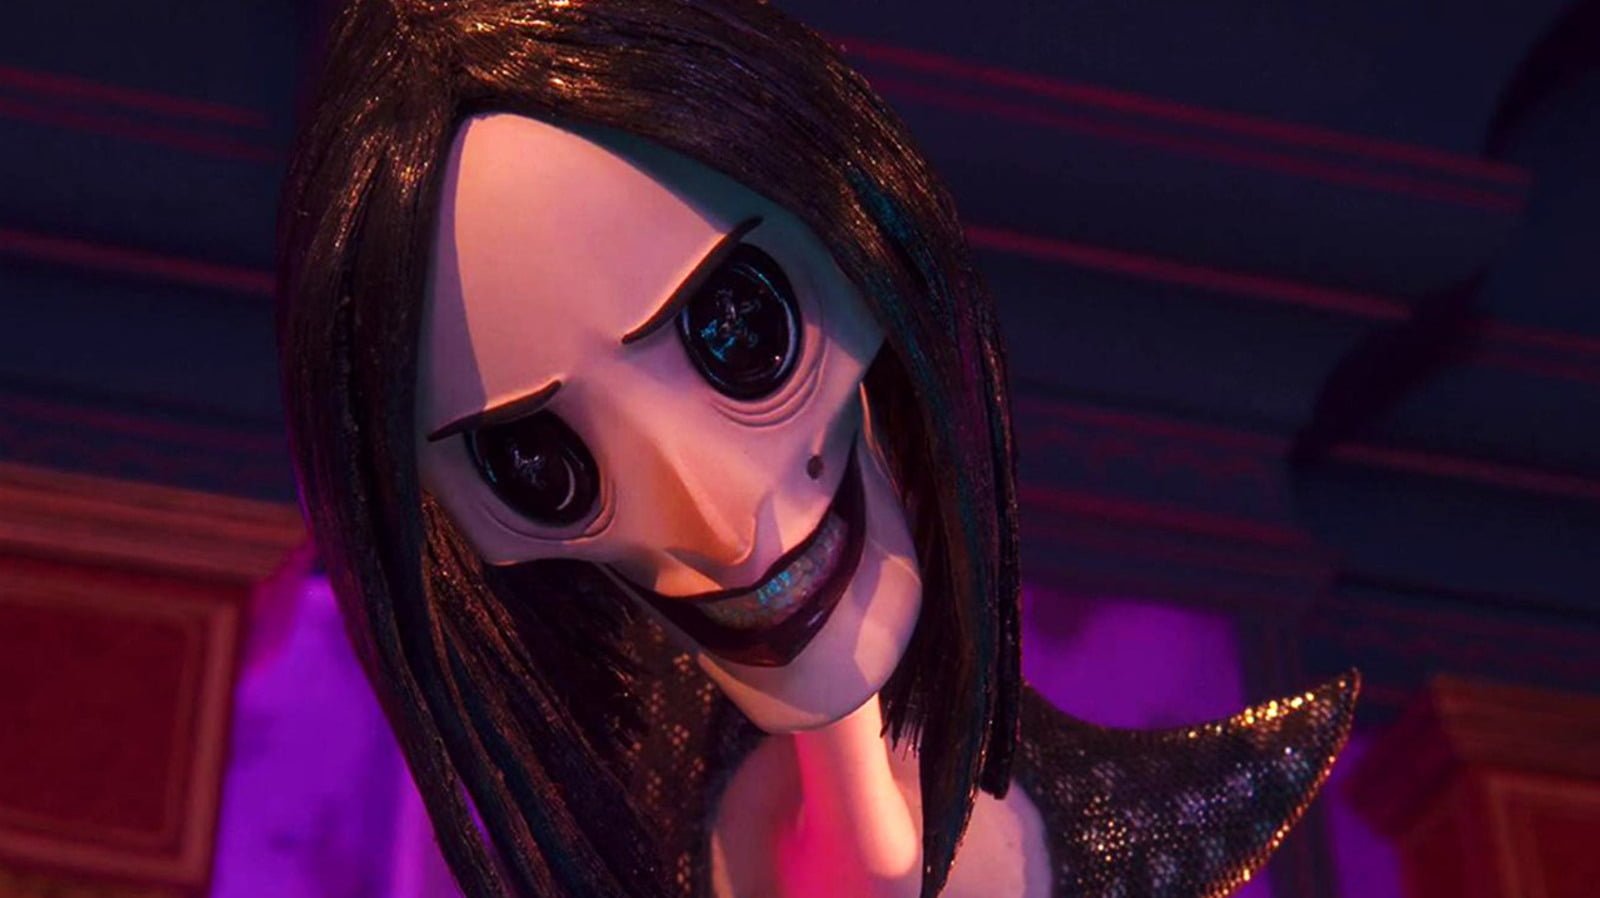 Movies like 'Coraline' that are animated and creepy